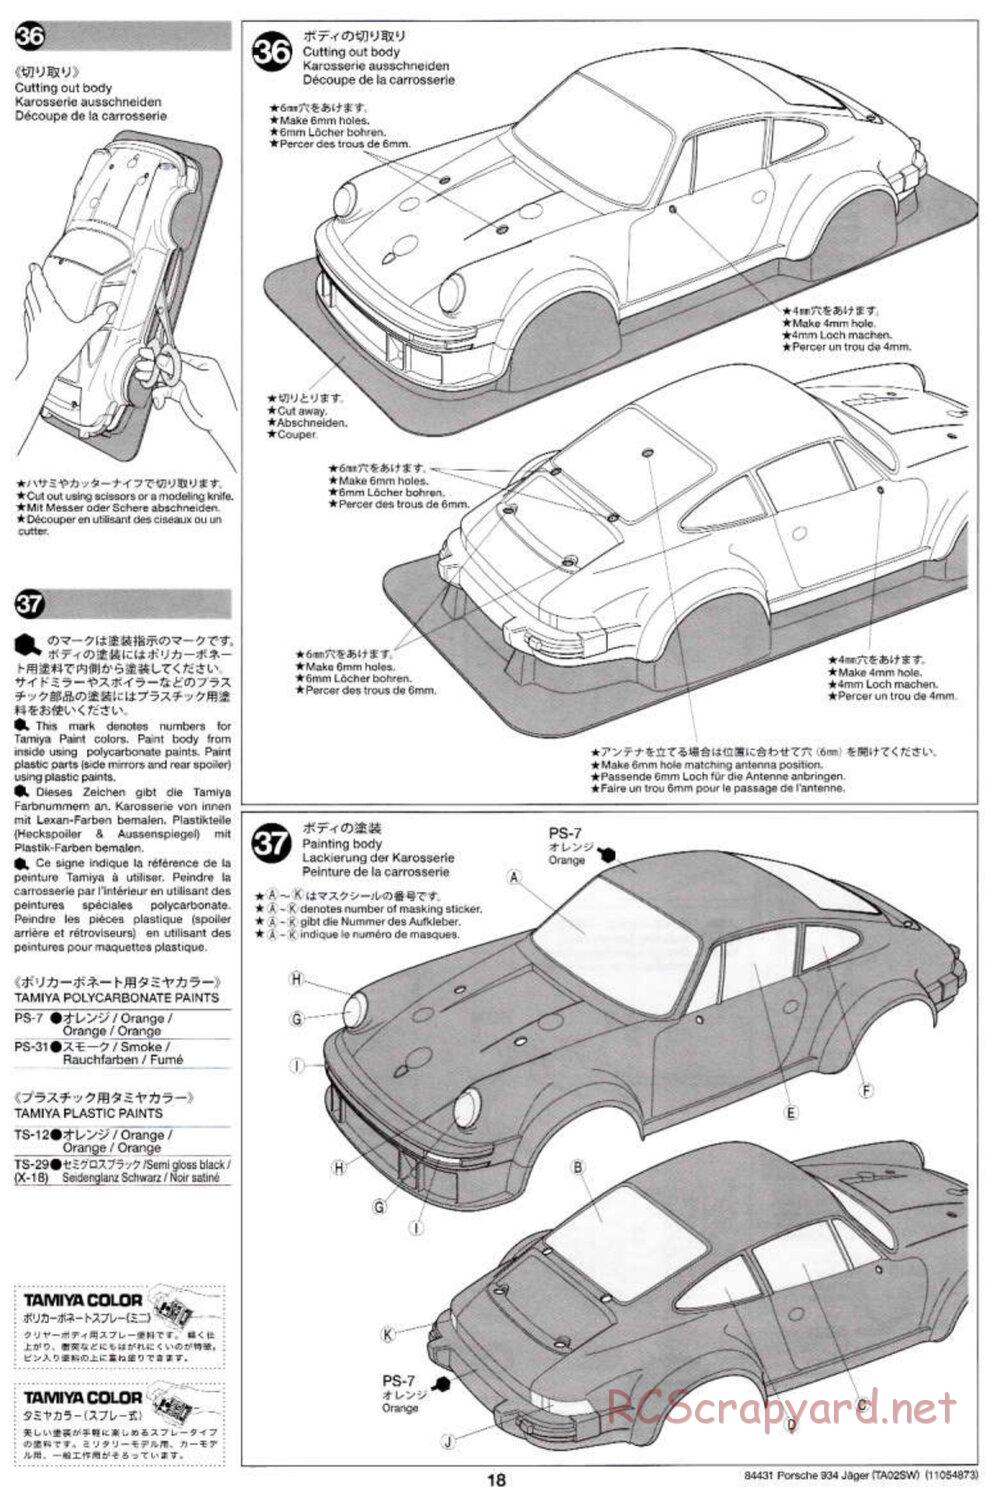 Tamiya - Porsche Turbo RSR Type 934 Jagermeister - TA-02SW Chassis - Manual - Page 18